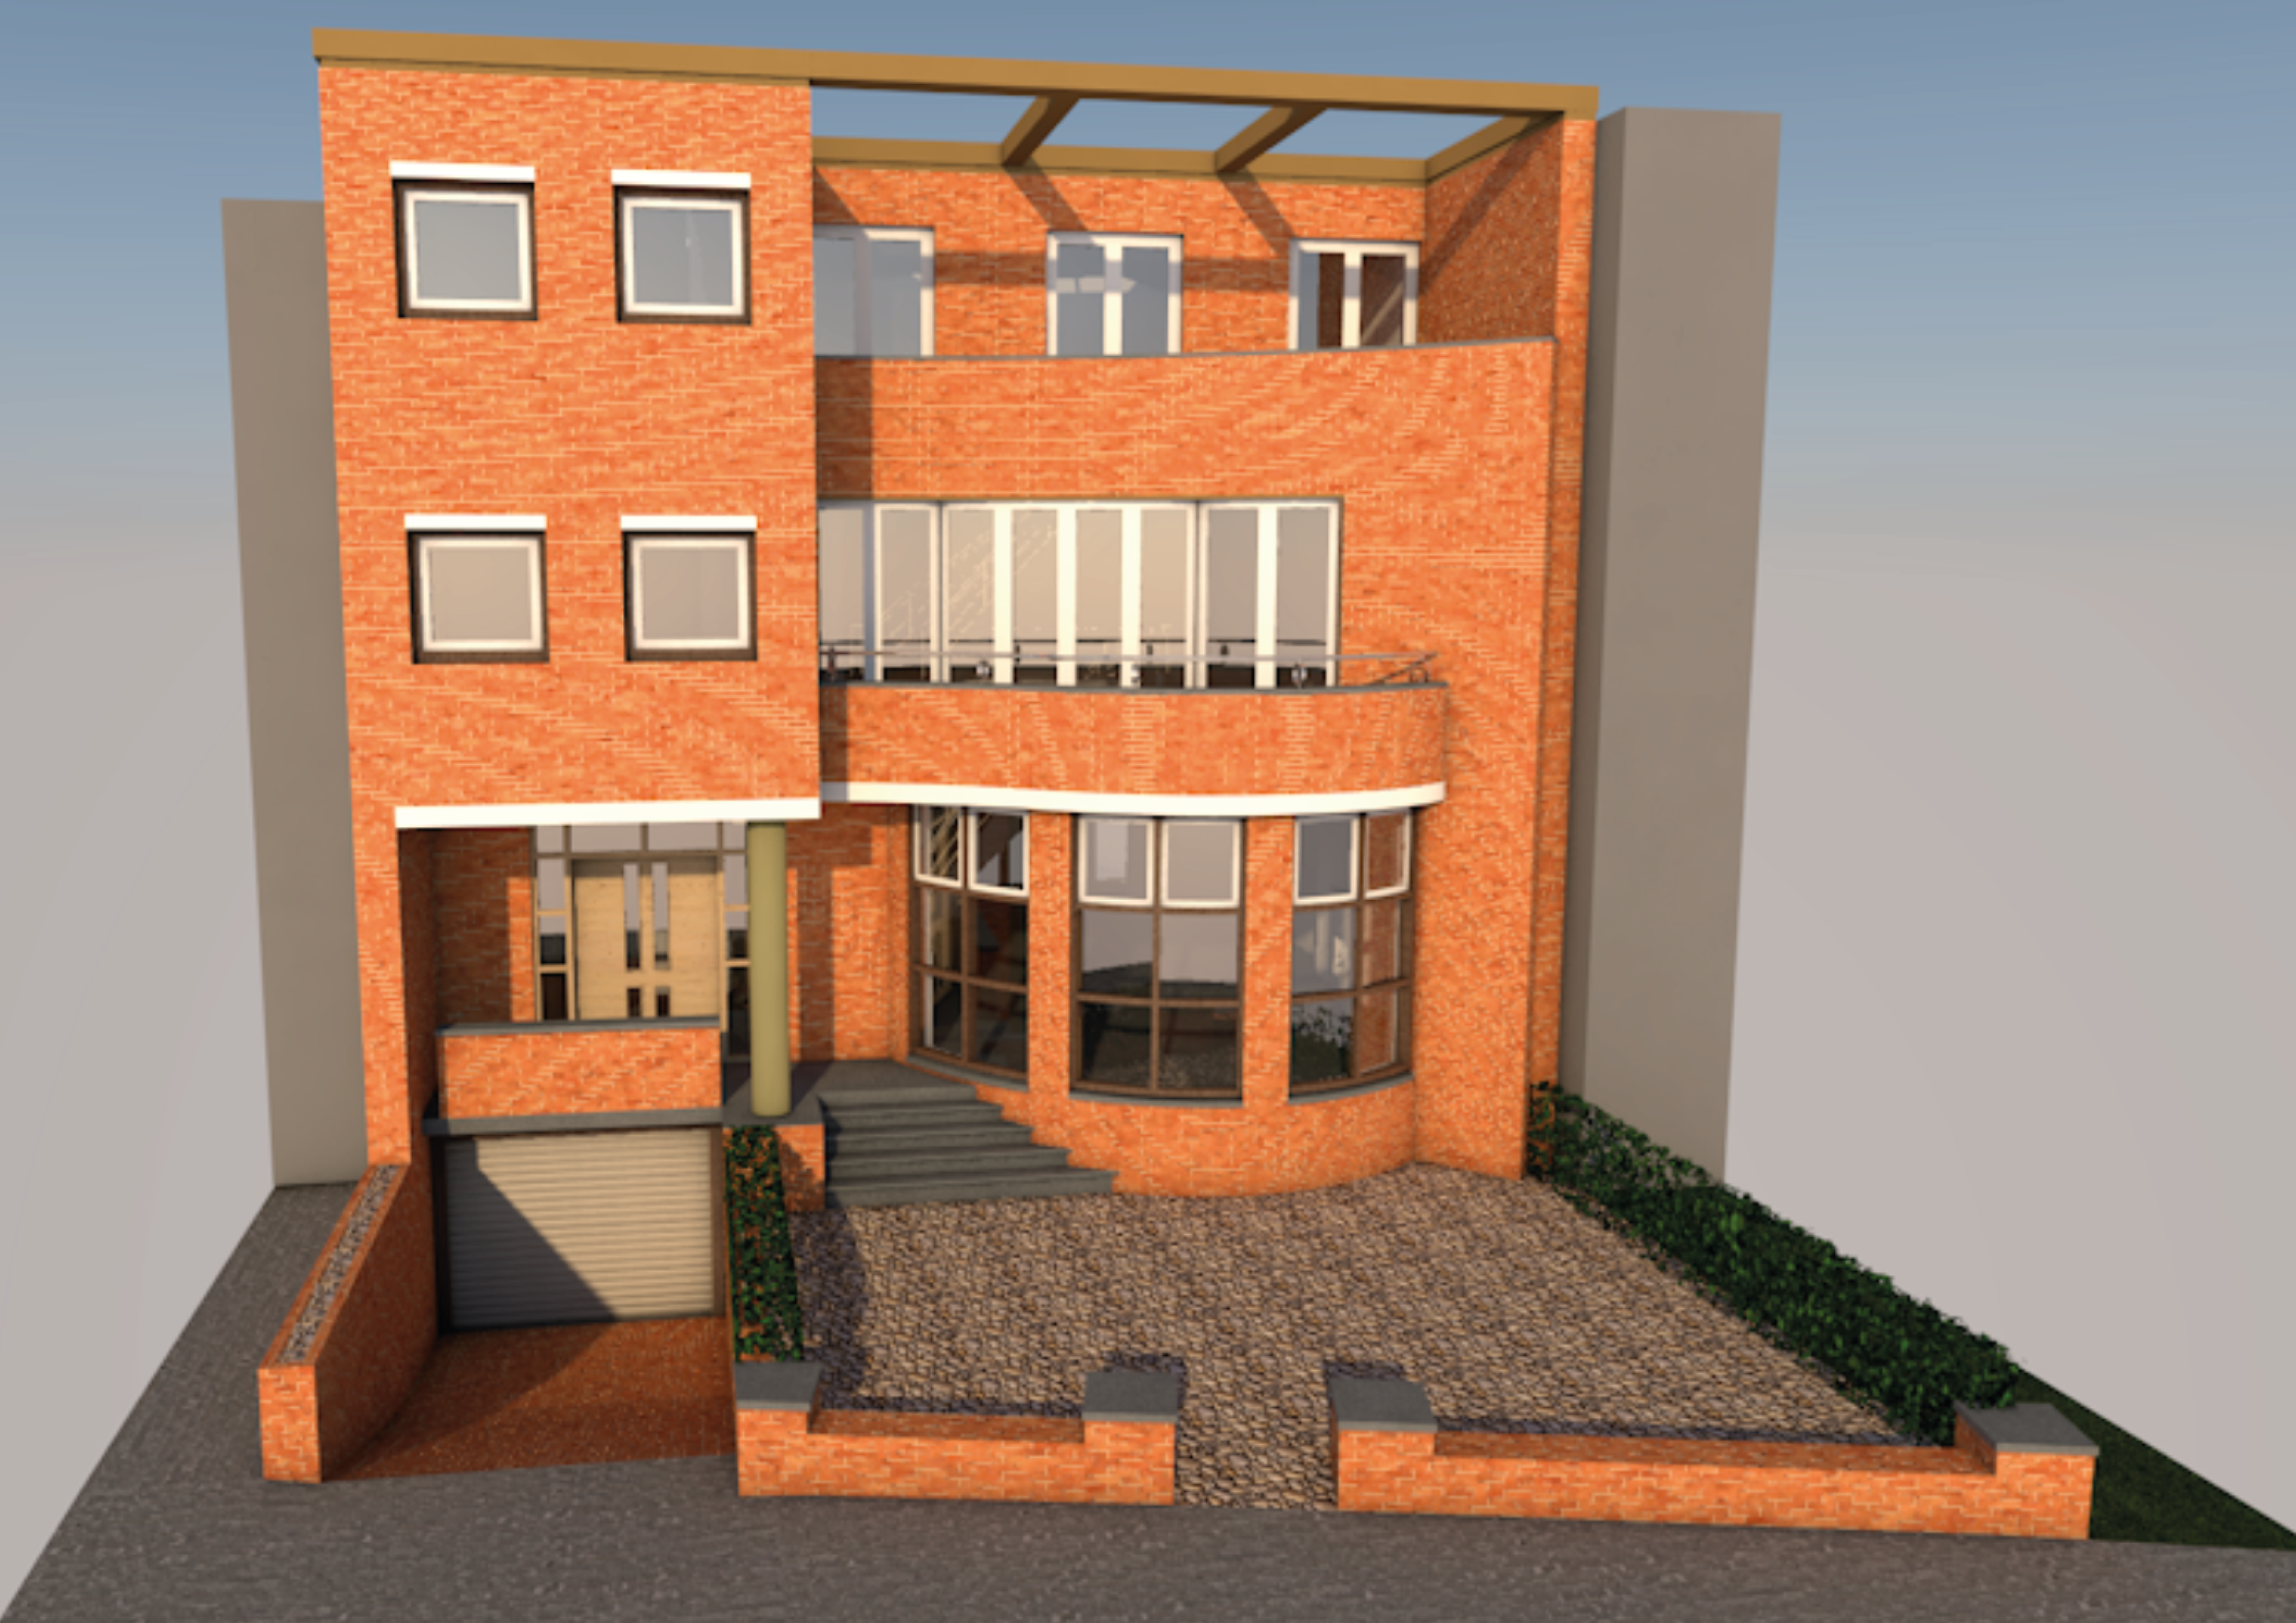 Residence in Utrecht | Measured with 3D laser scanner | Model made in Archicad